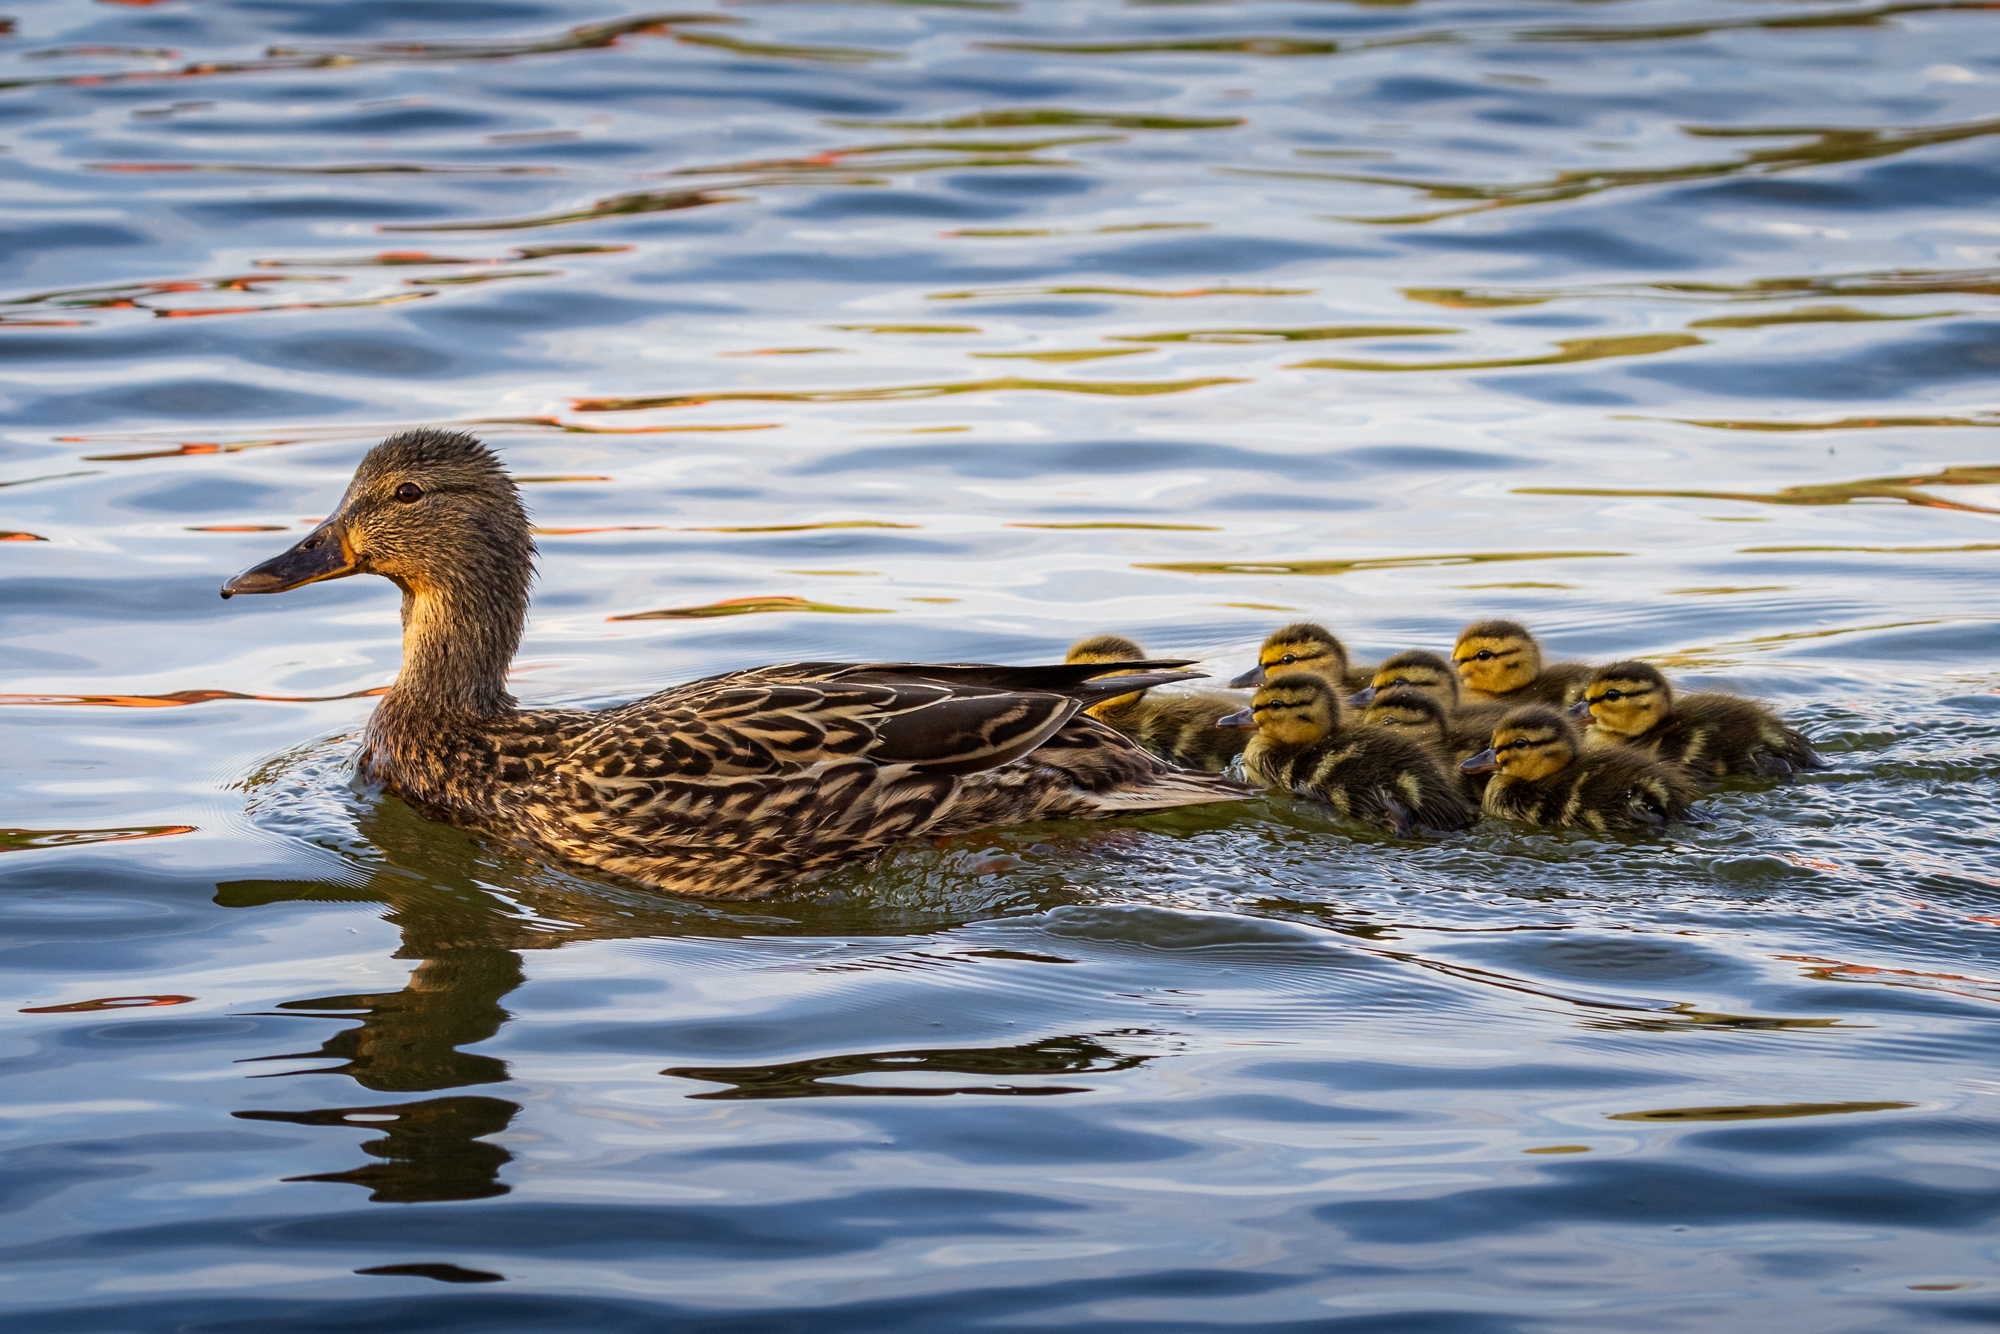 Female mallard duck, with ducklings swimming behind.